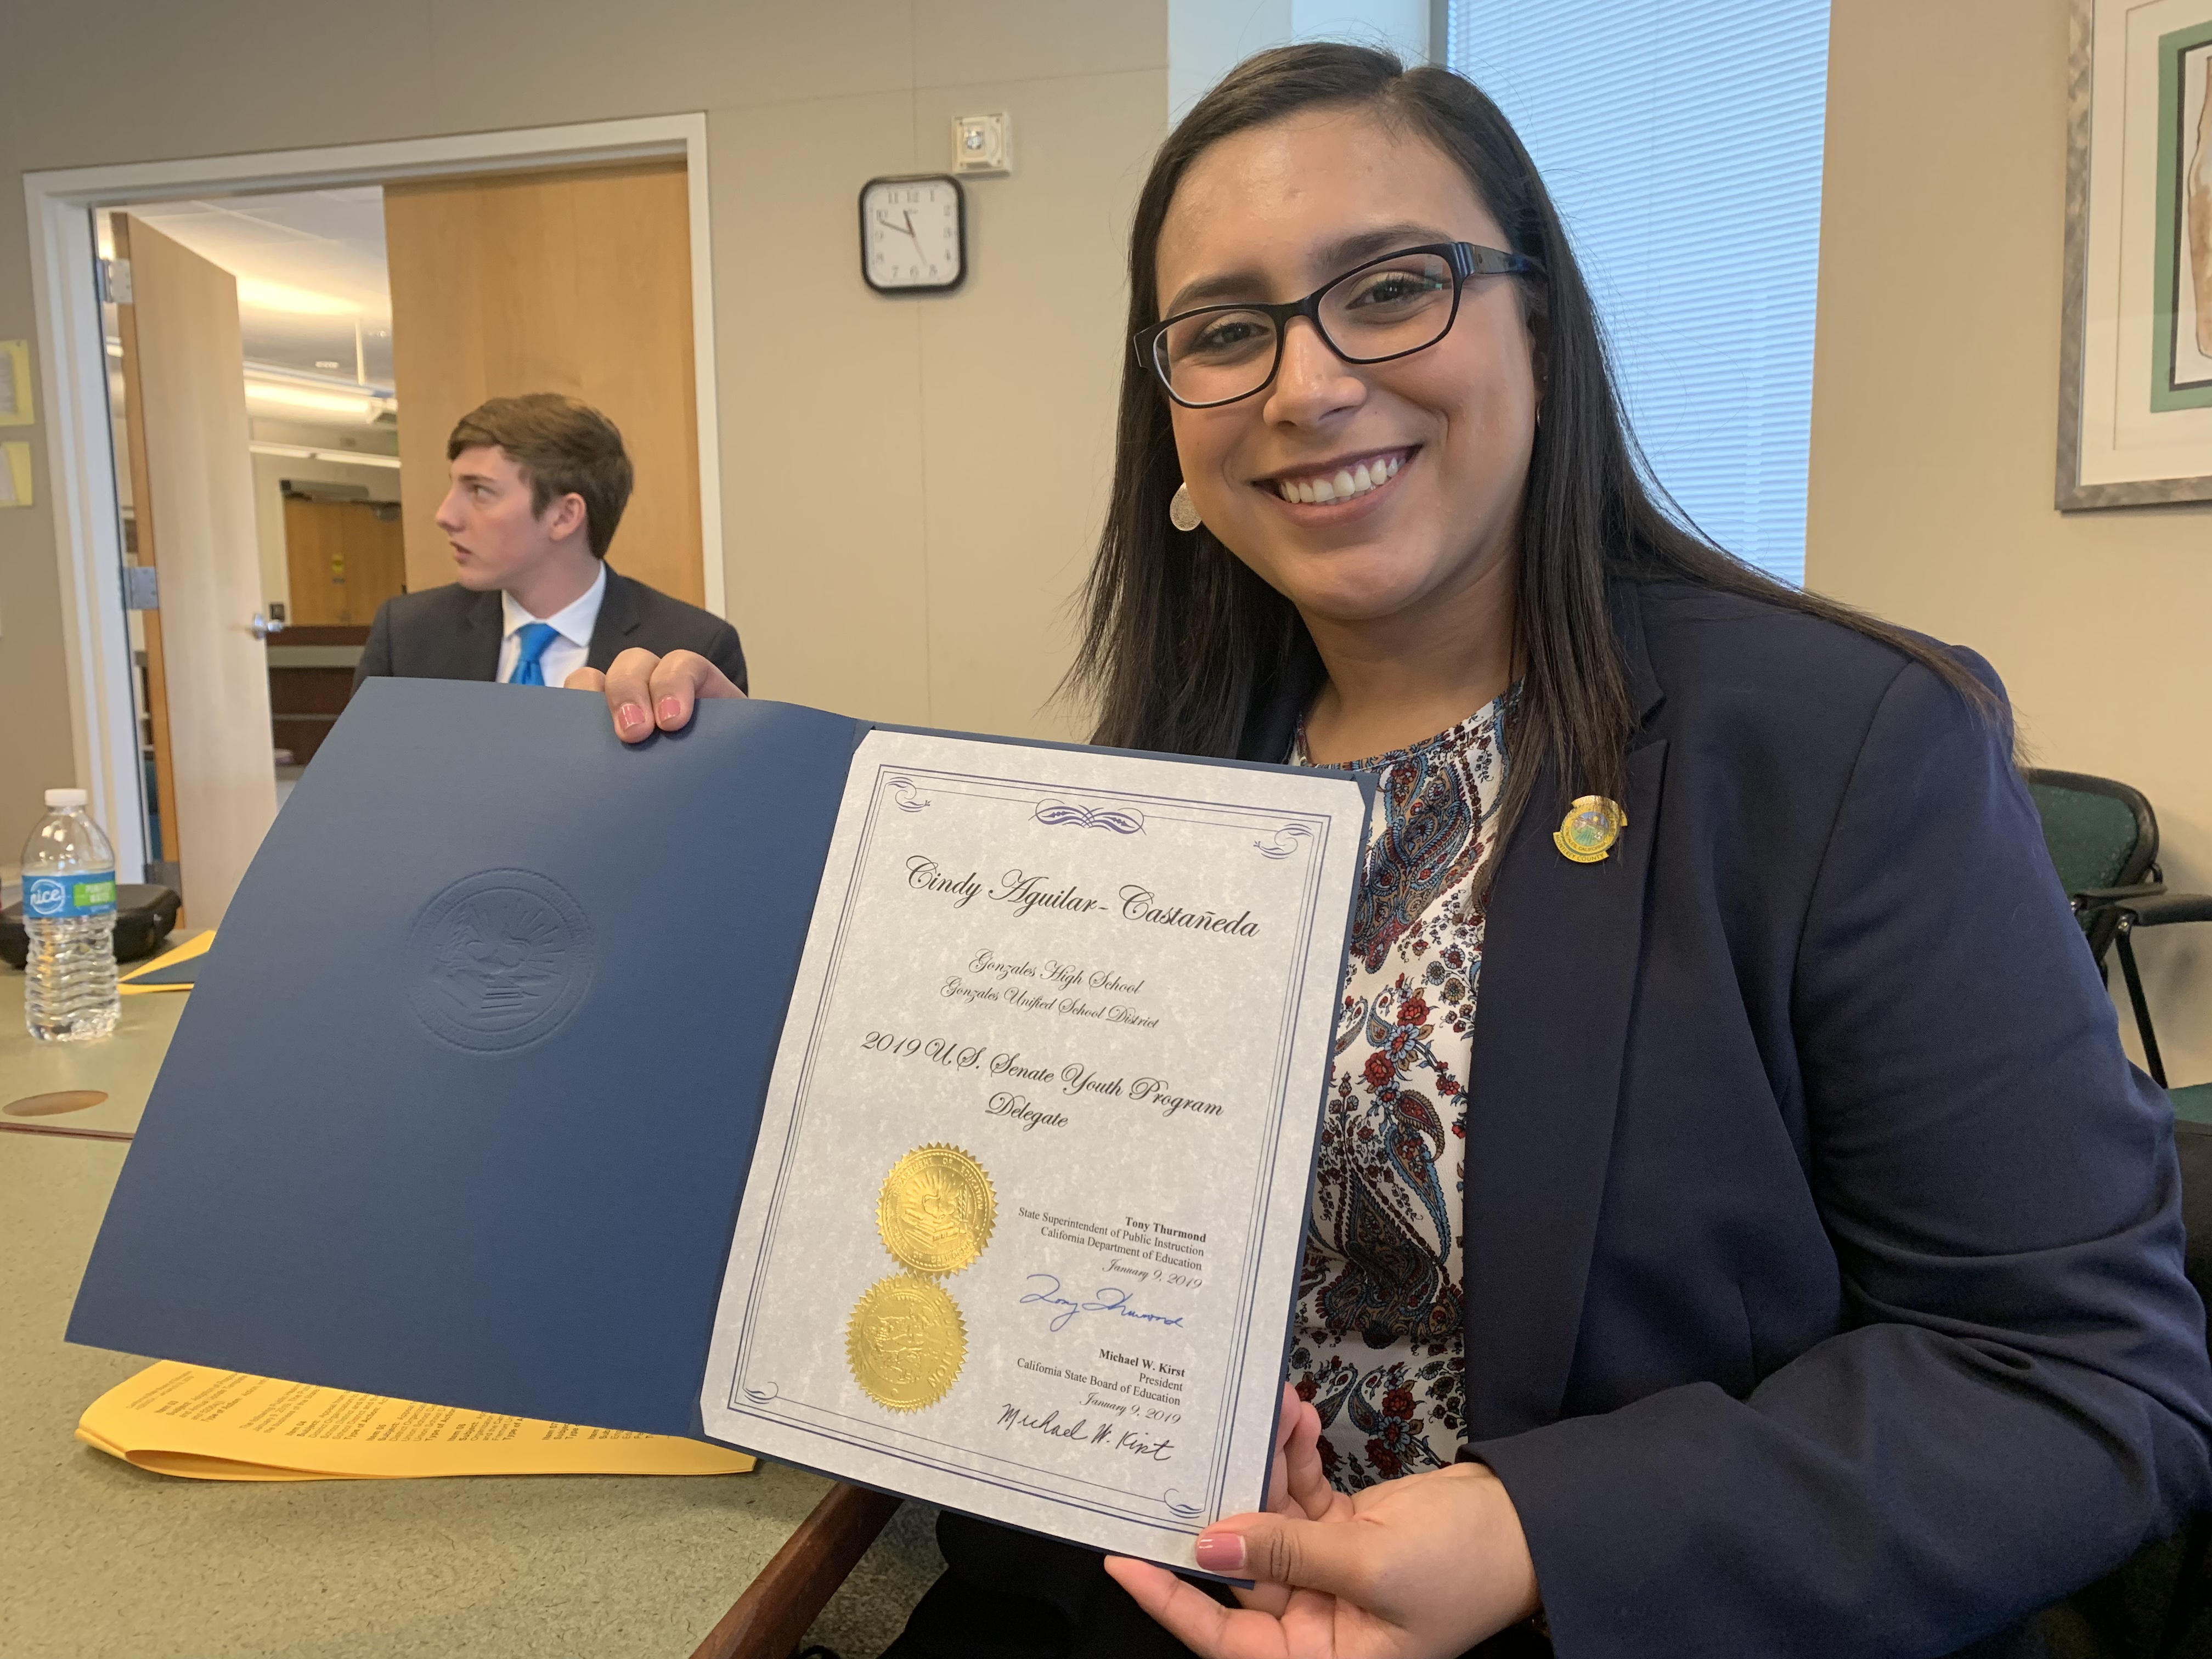 Cindy Aguilar with certificate